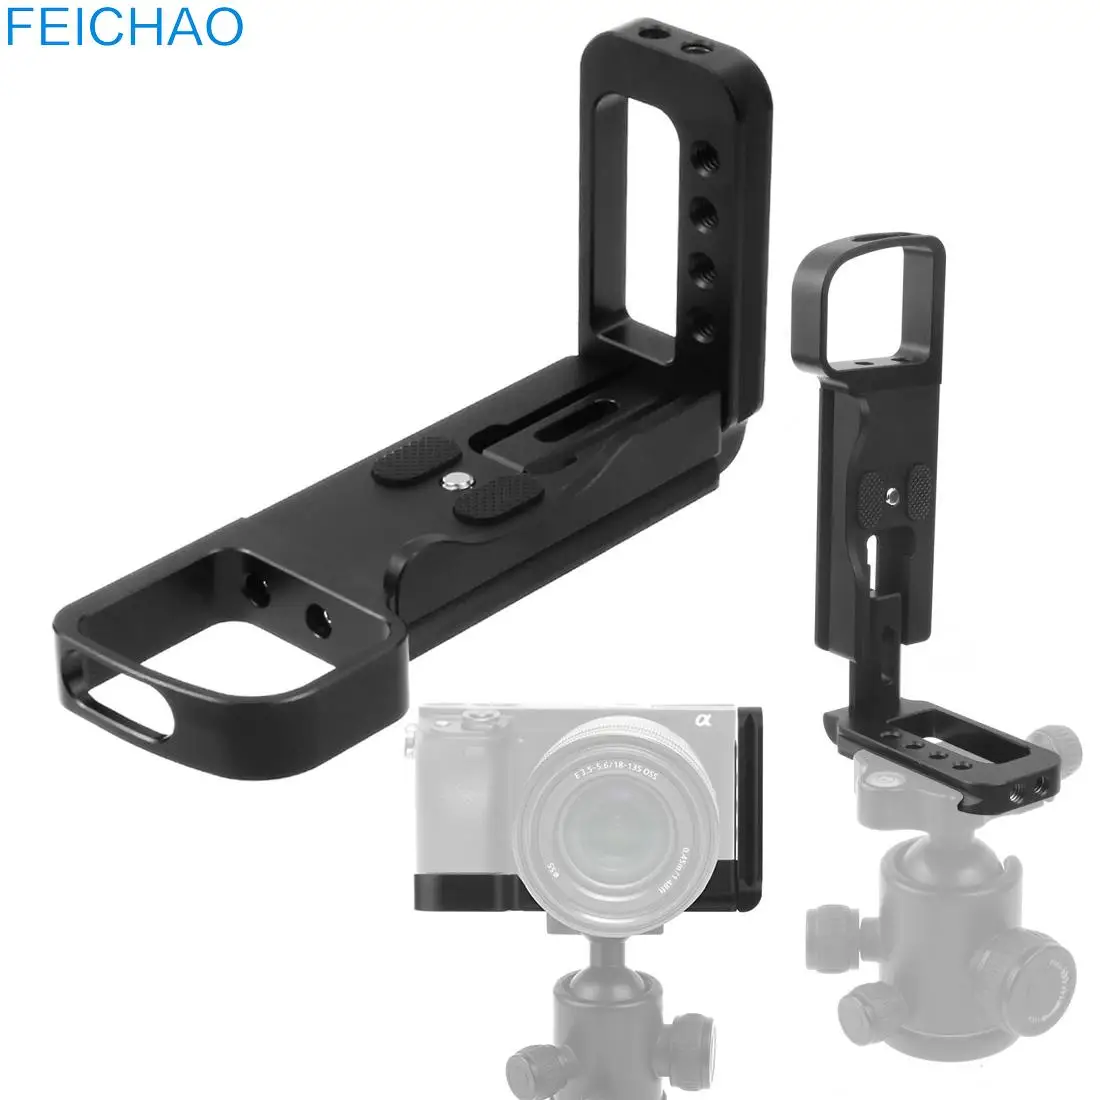 

Vertical Shoot Hand Grip Quick Release L Plate Bracket Tripod Monopod Holder for Sony A6000 A6100 A6300 A6400 A6500 DSLR Camera